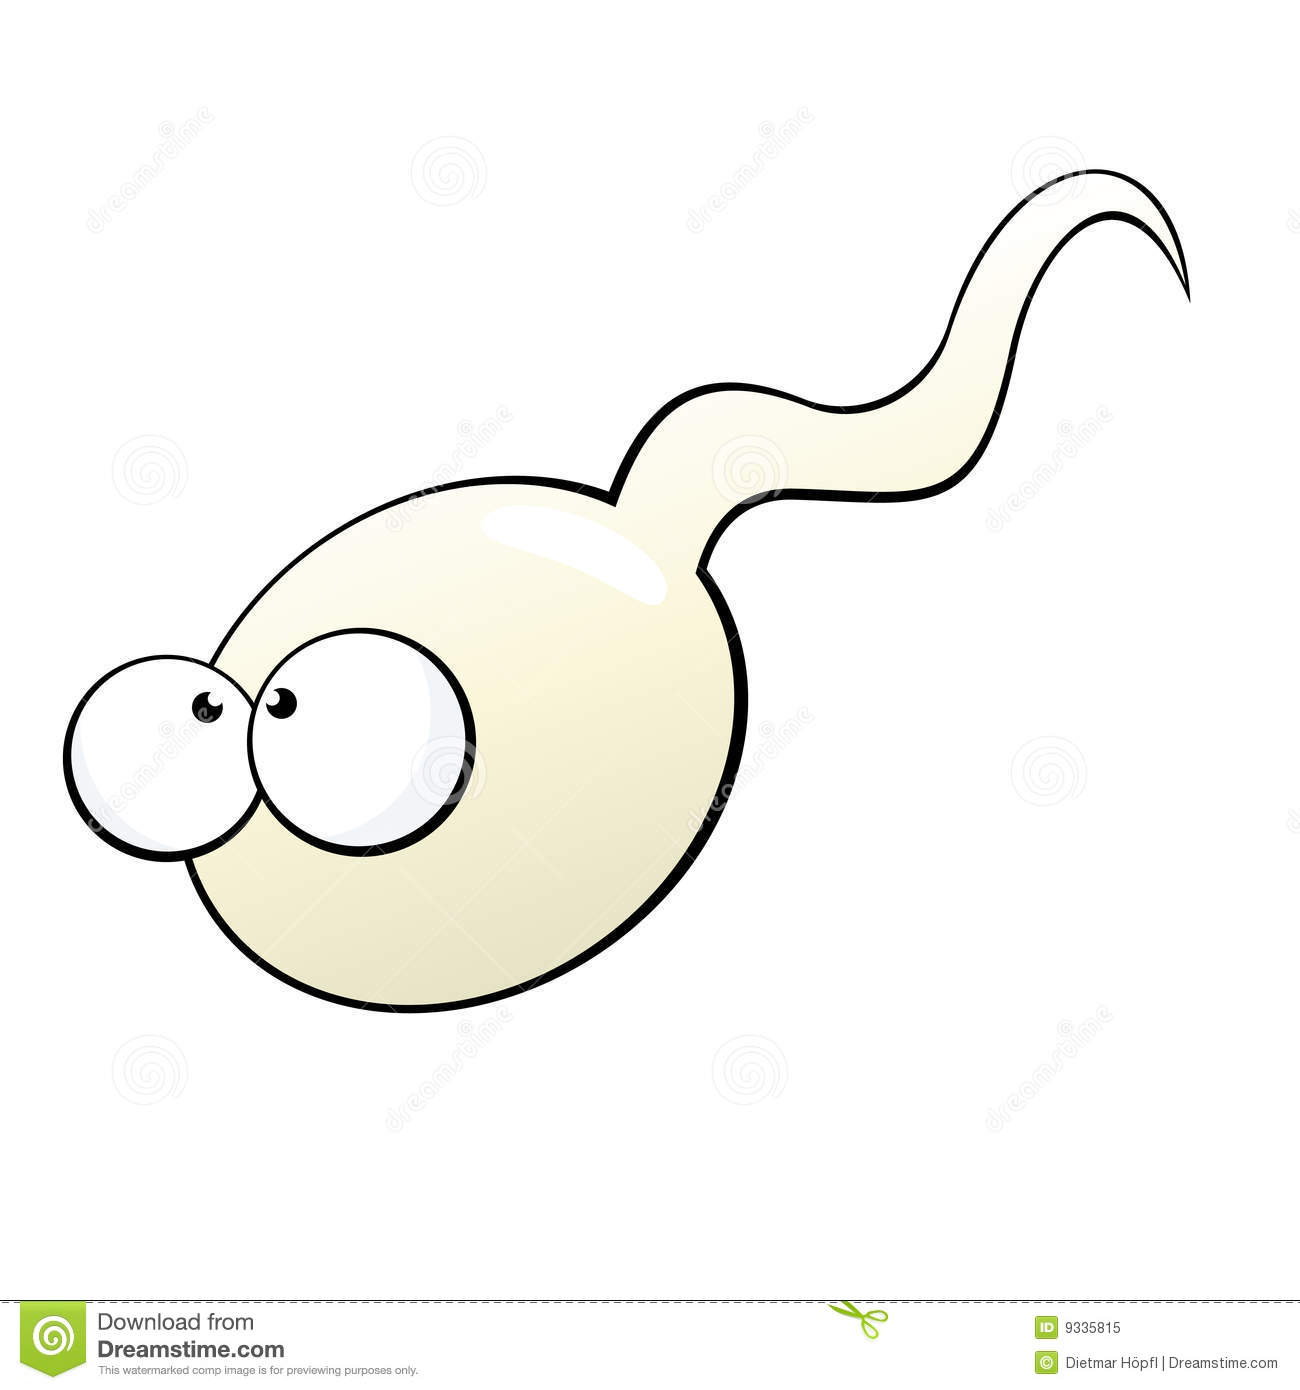 Sperm clipart #17, Download drawings